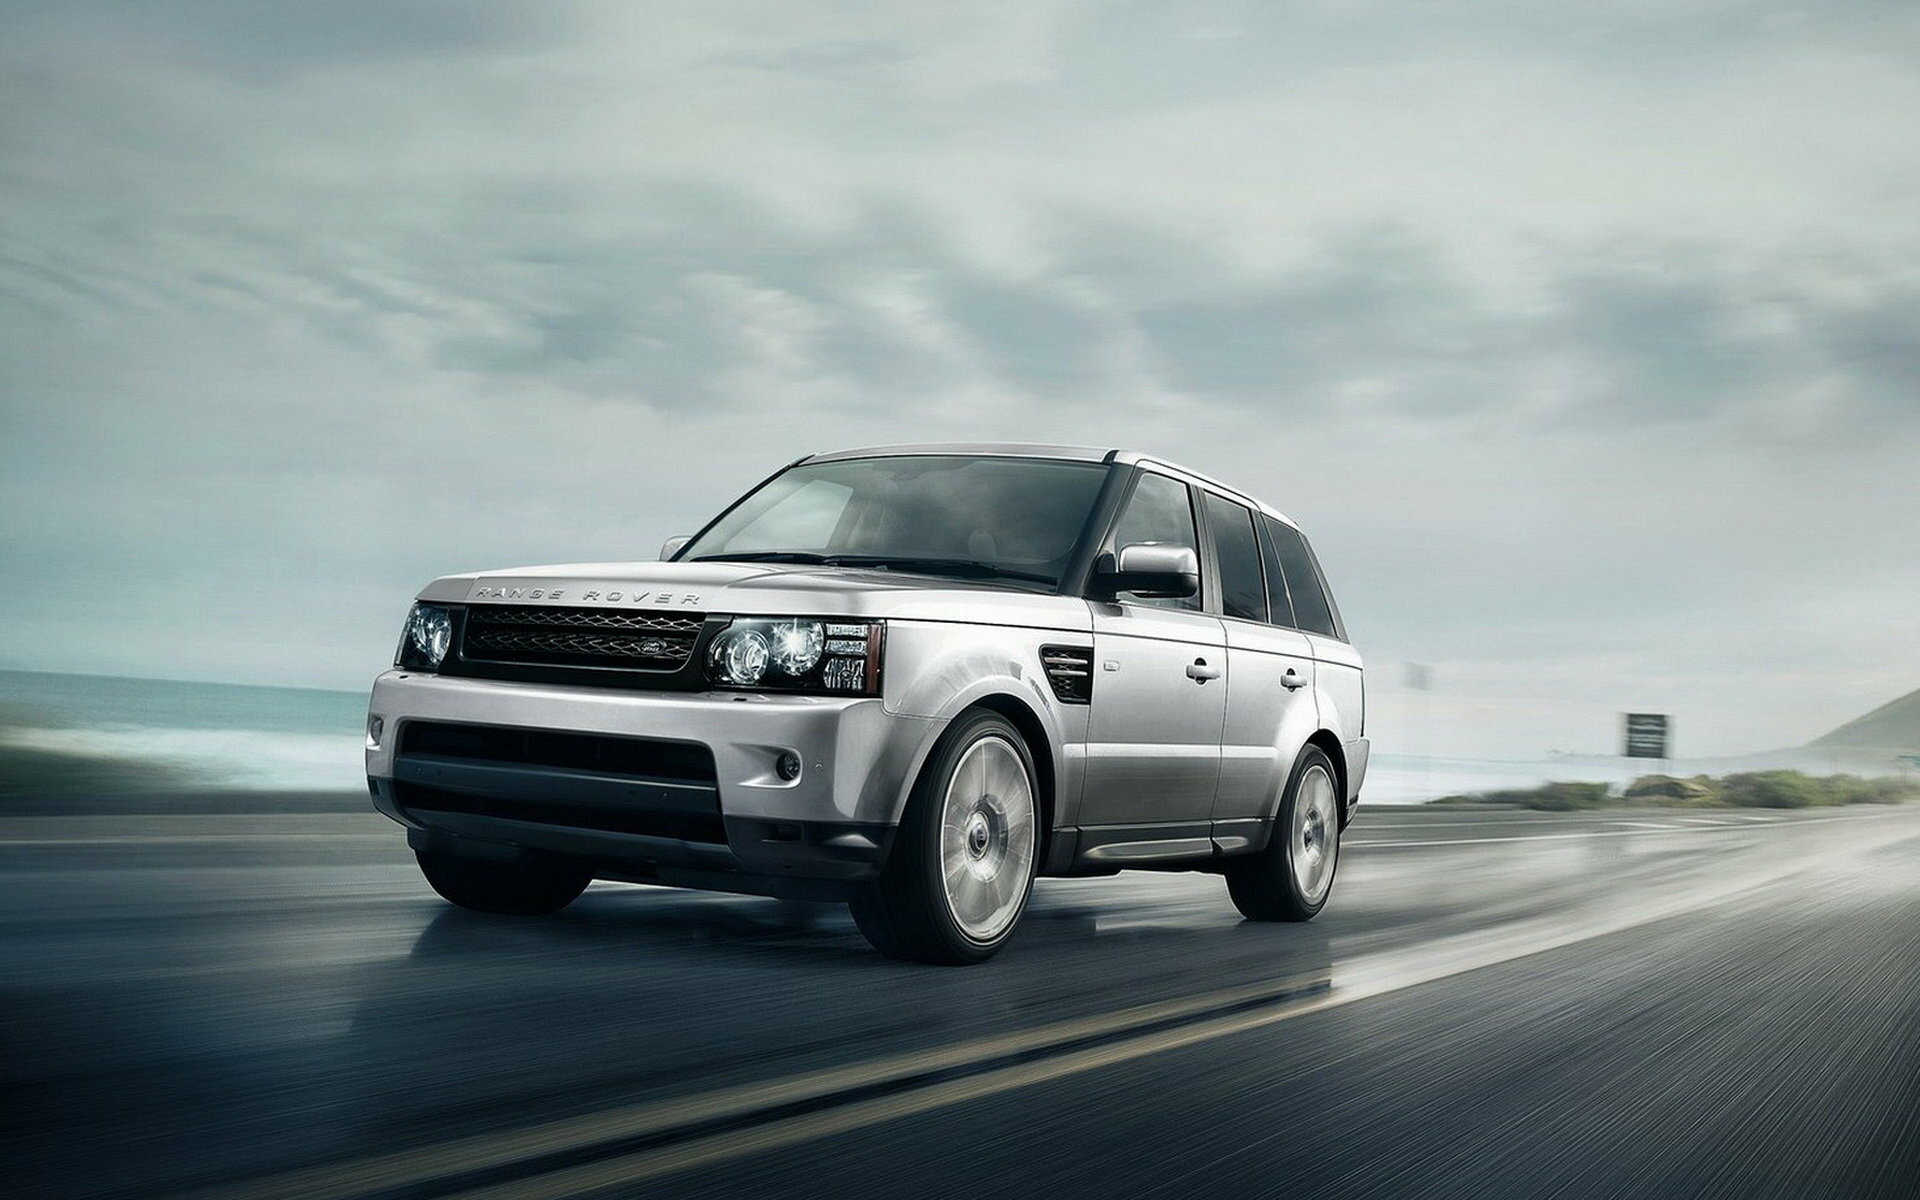 Range Rover: Classic vehicle series was produced from 1969 to 1996 by the British Leyland. 1920x1200 HD Background.